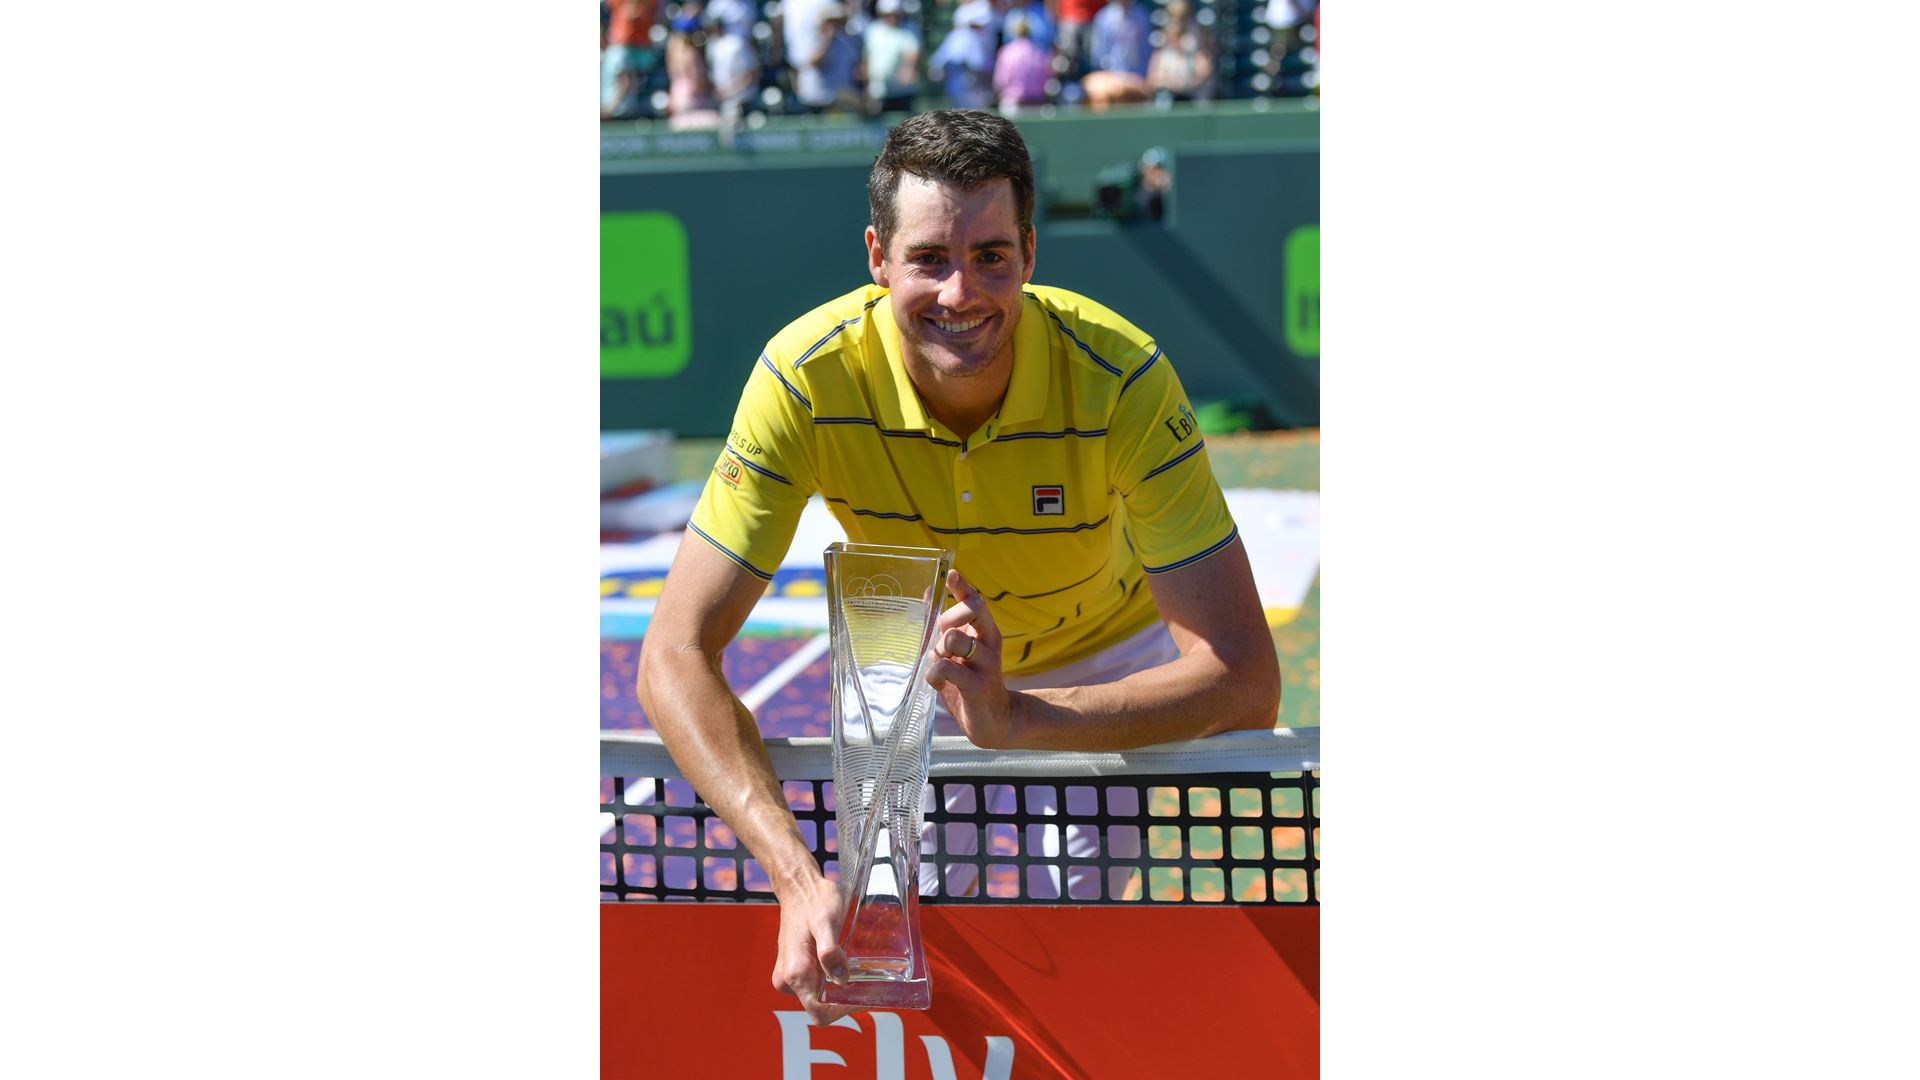 FILA Tennis Player John Isner Wins First ATP World Tour Masters 1000 Title in Miami